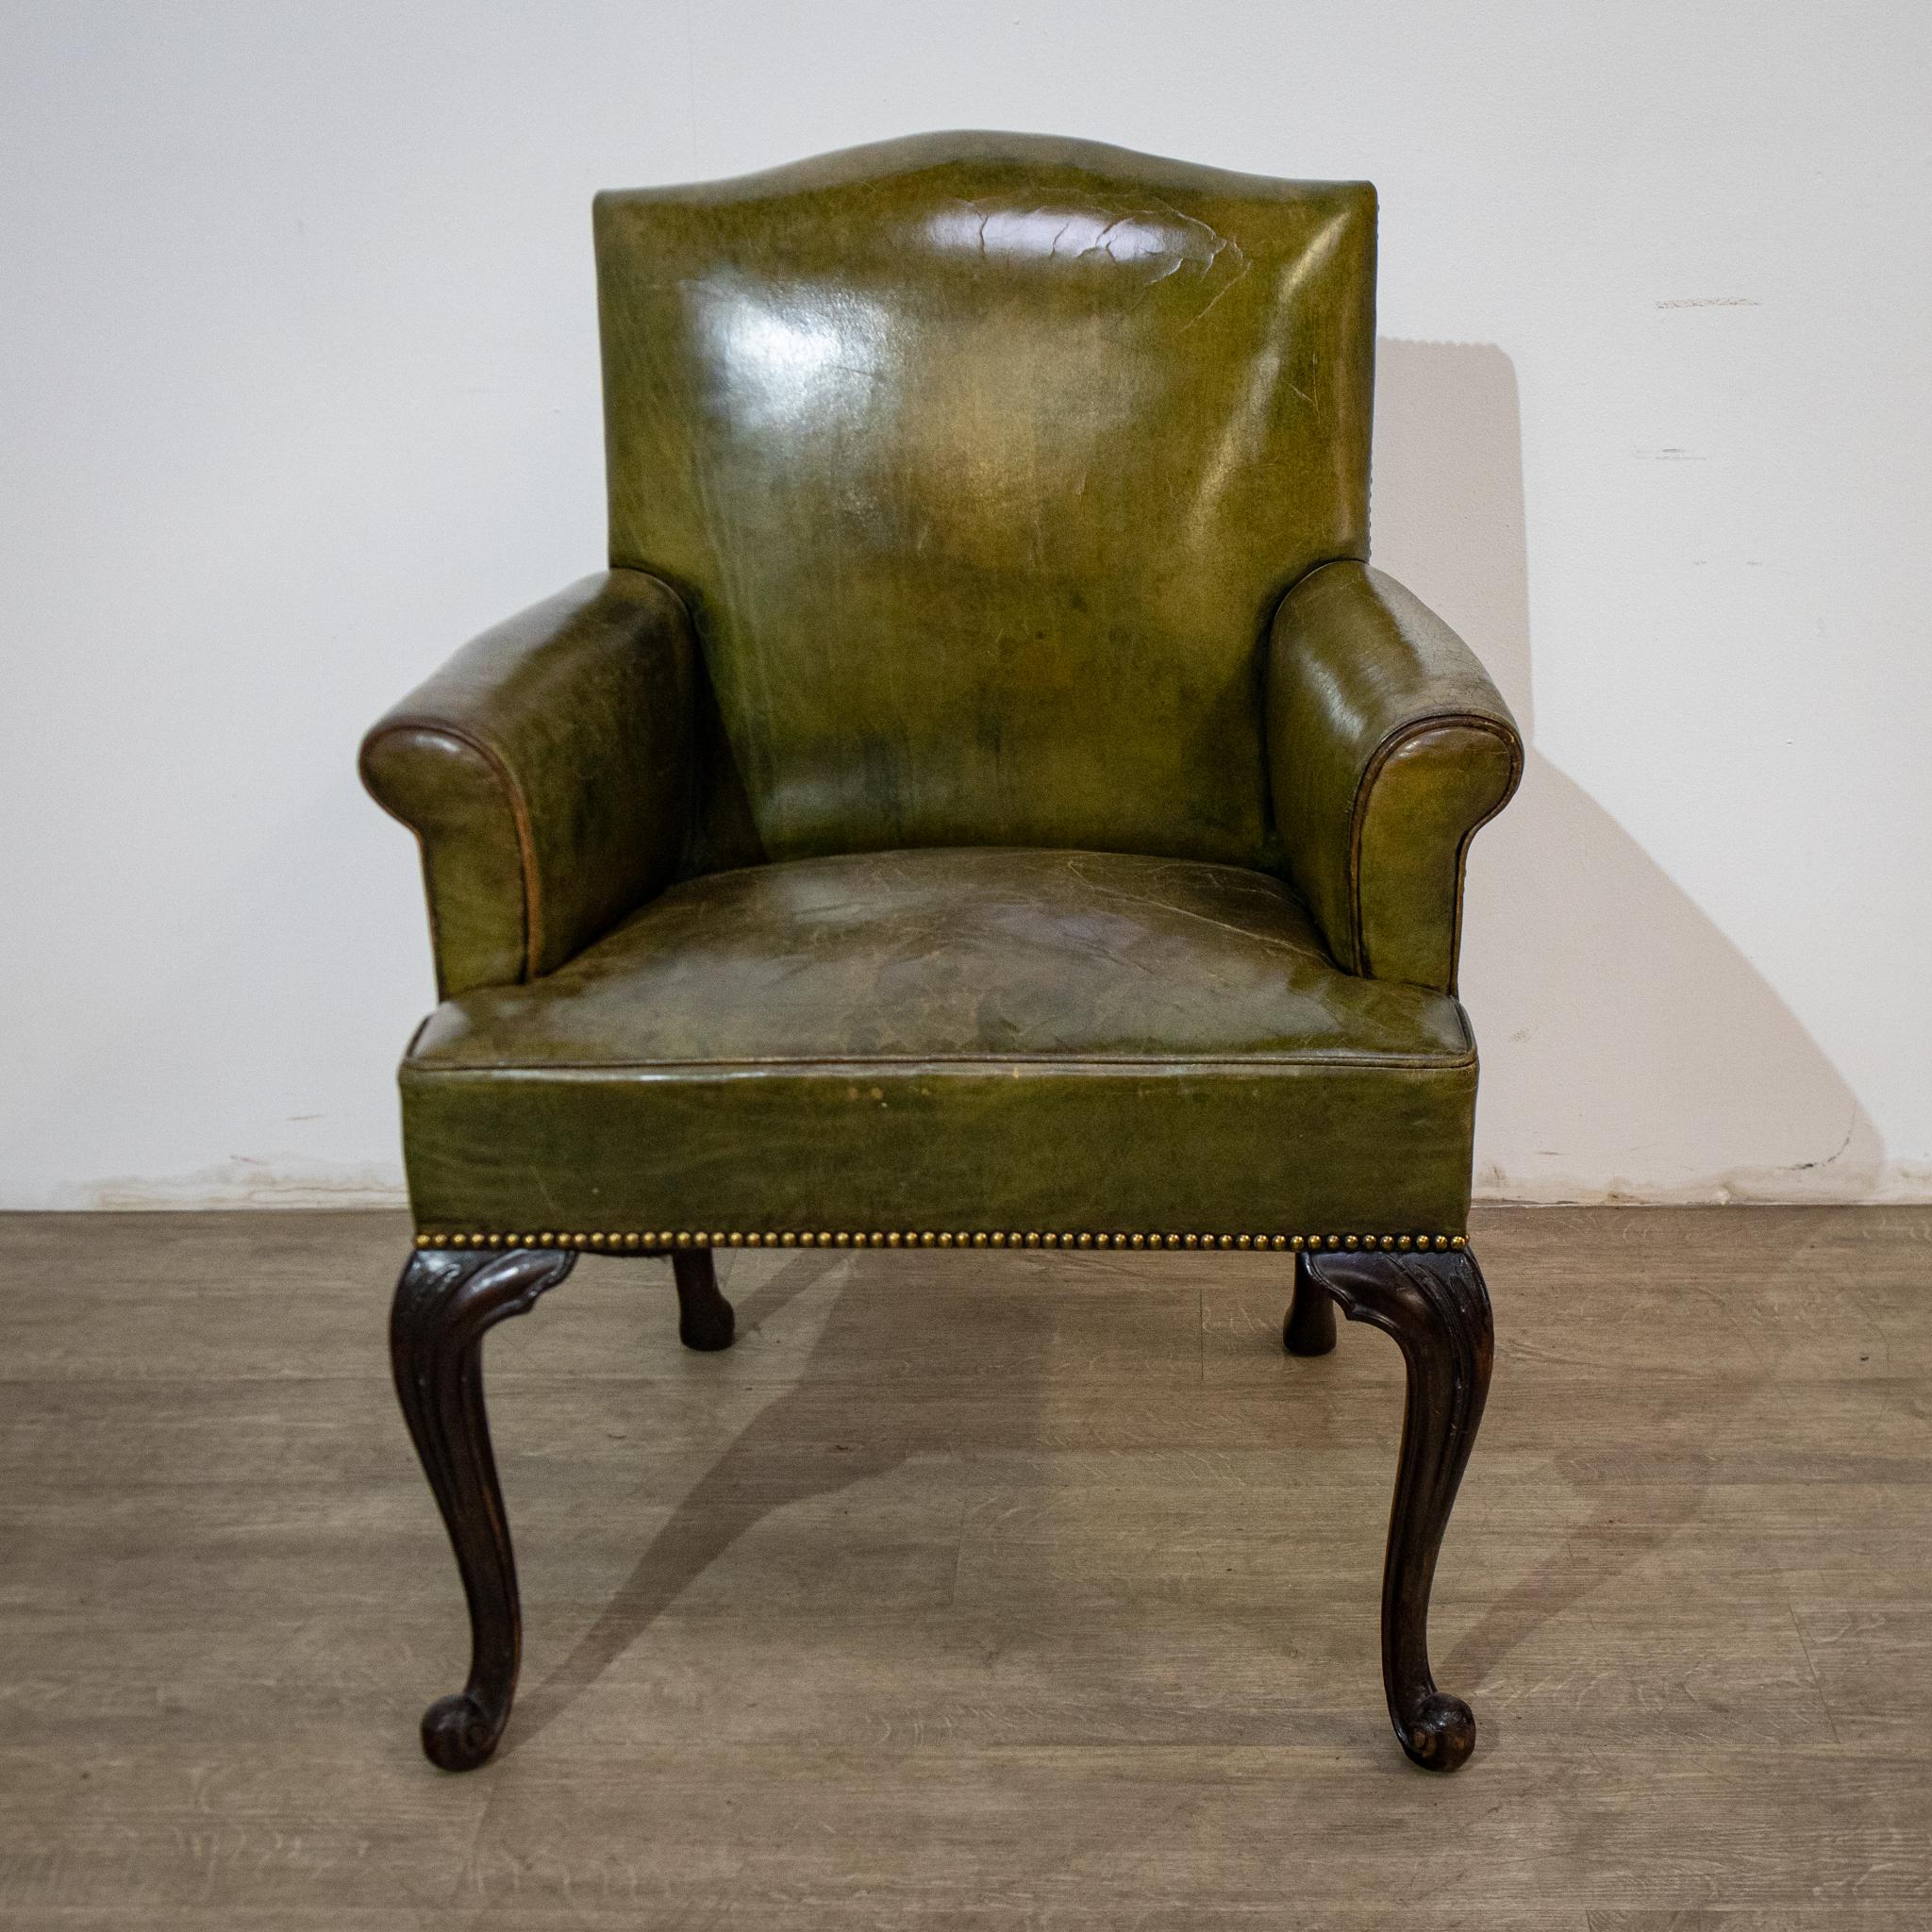 An attractive leather armchair suitable for a desk, this is in an olive green colour and has a mahogany frame with cabriole legs. The seat is sprung and there is some lovely leather piping around the fronts of the arms and the seat, with upholstery